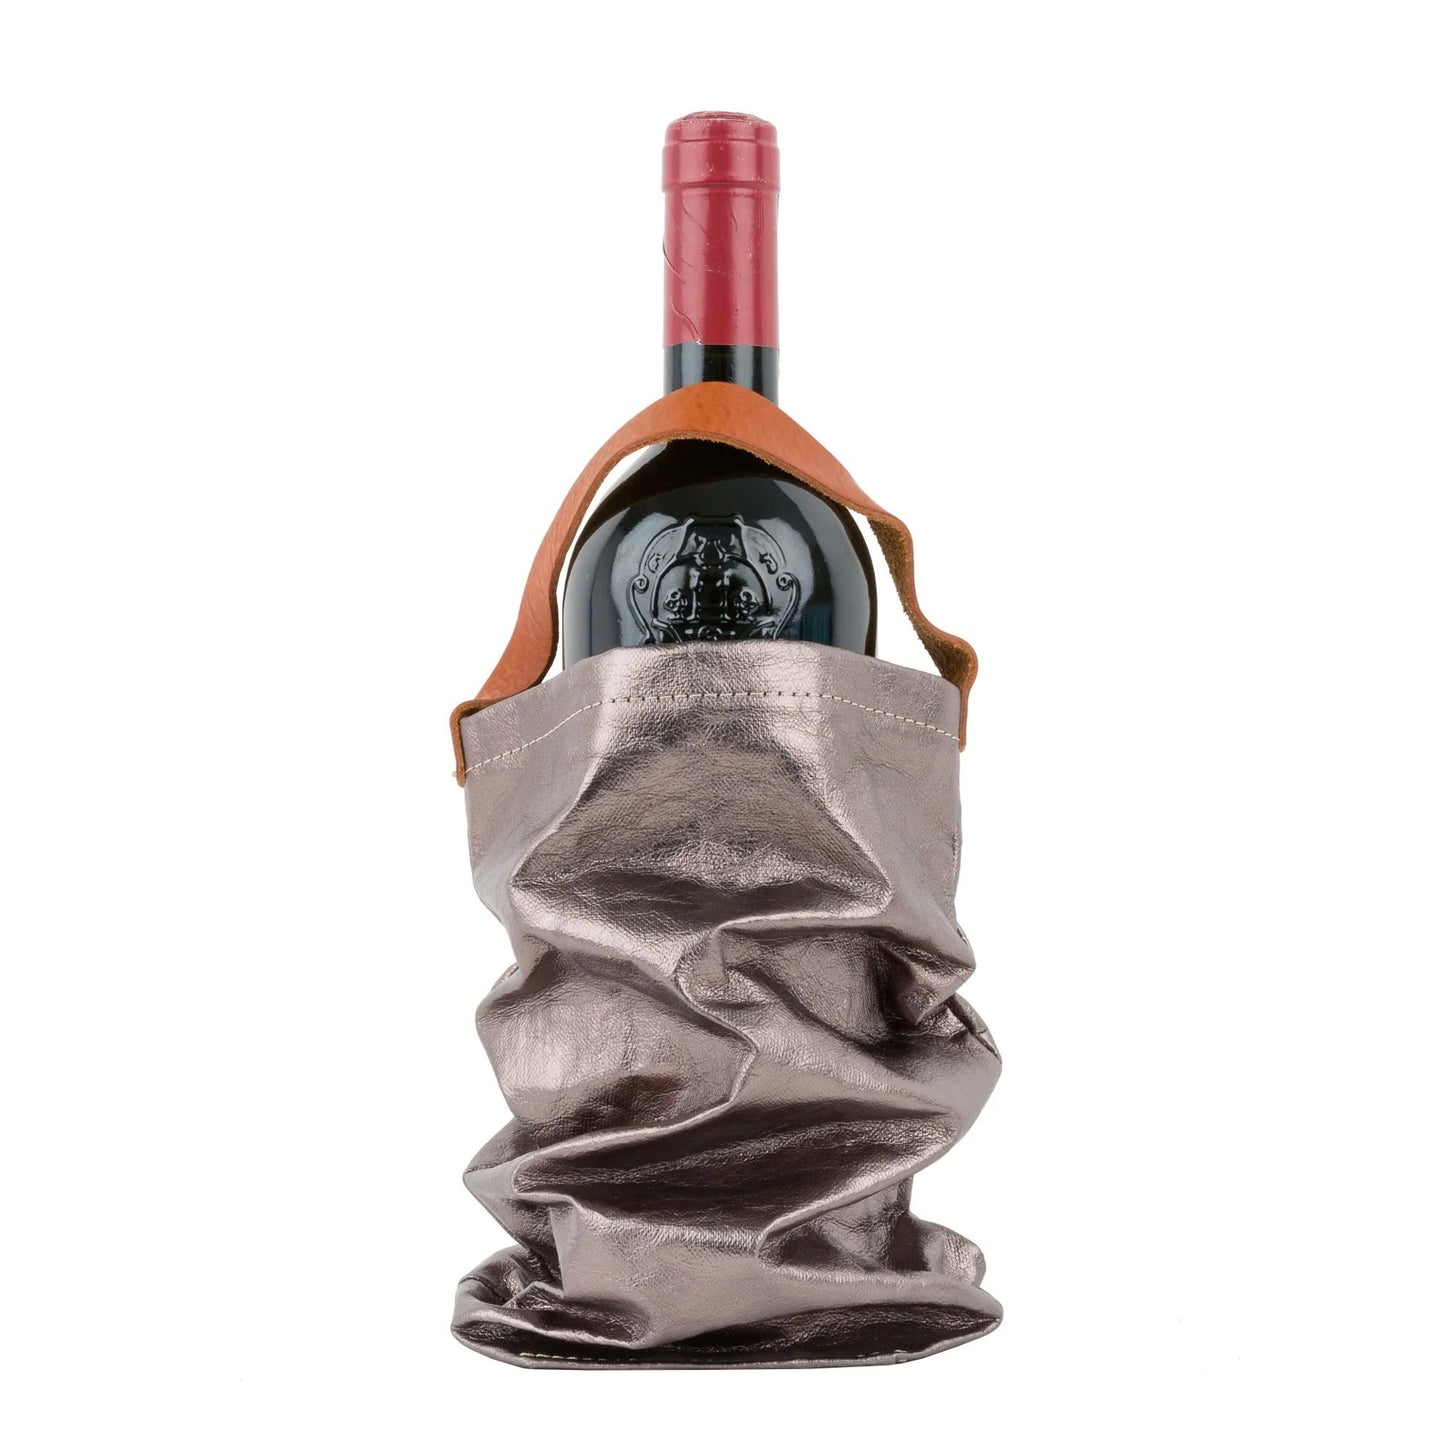 WINE BAG CARRYING TOTE